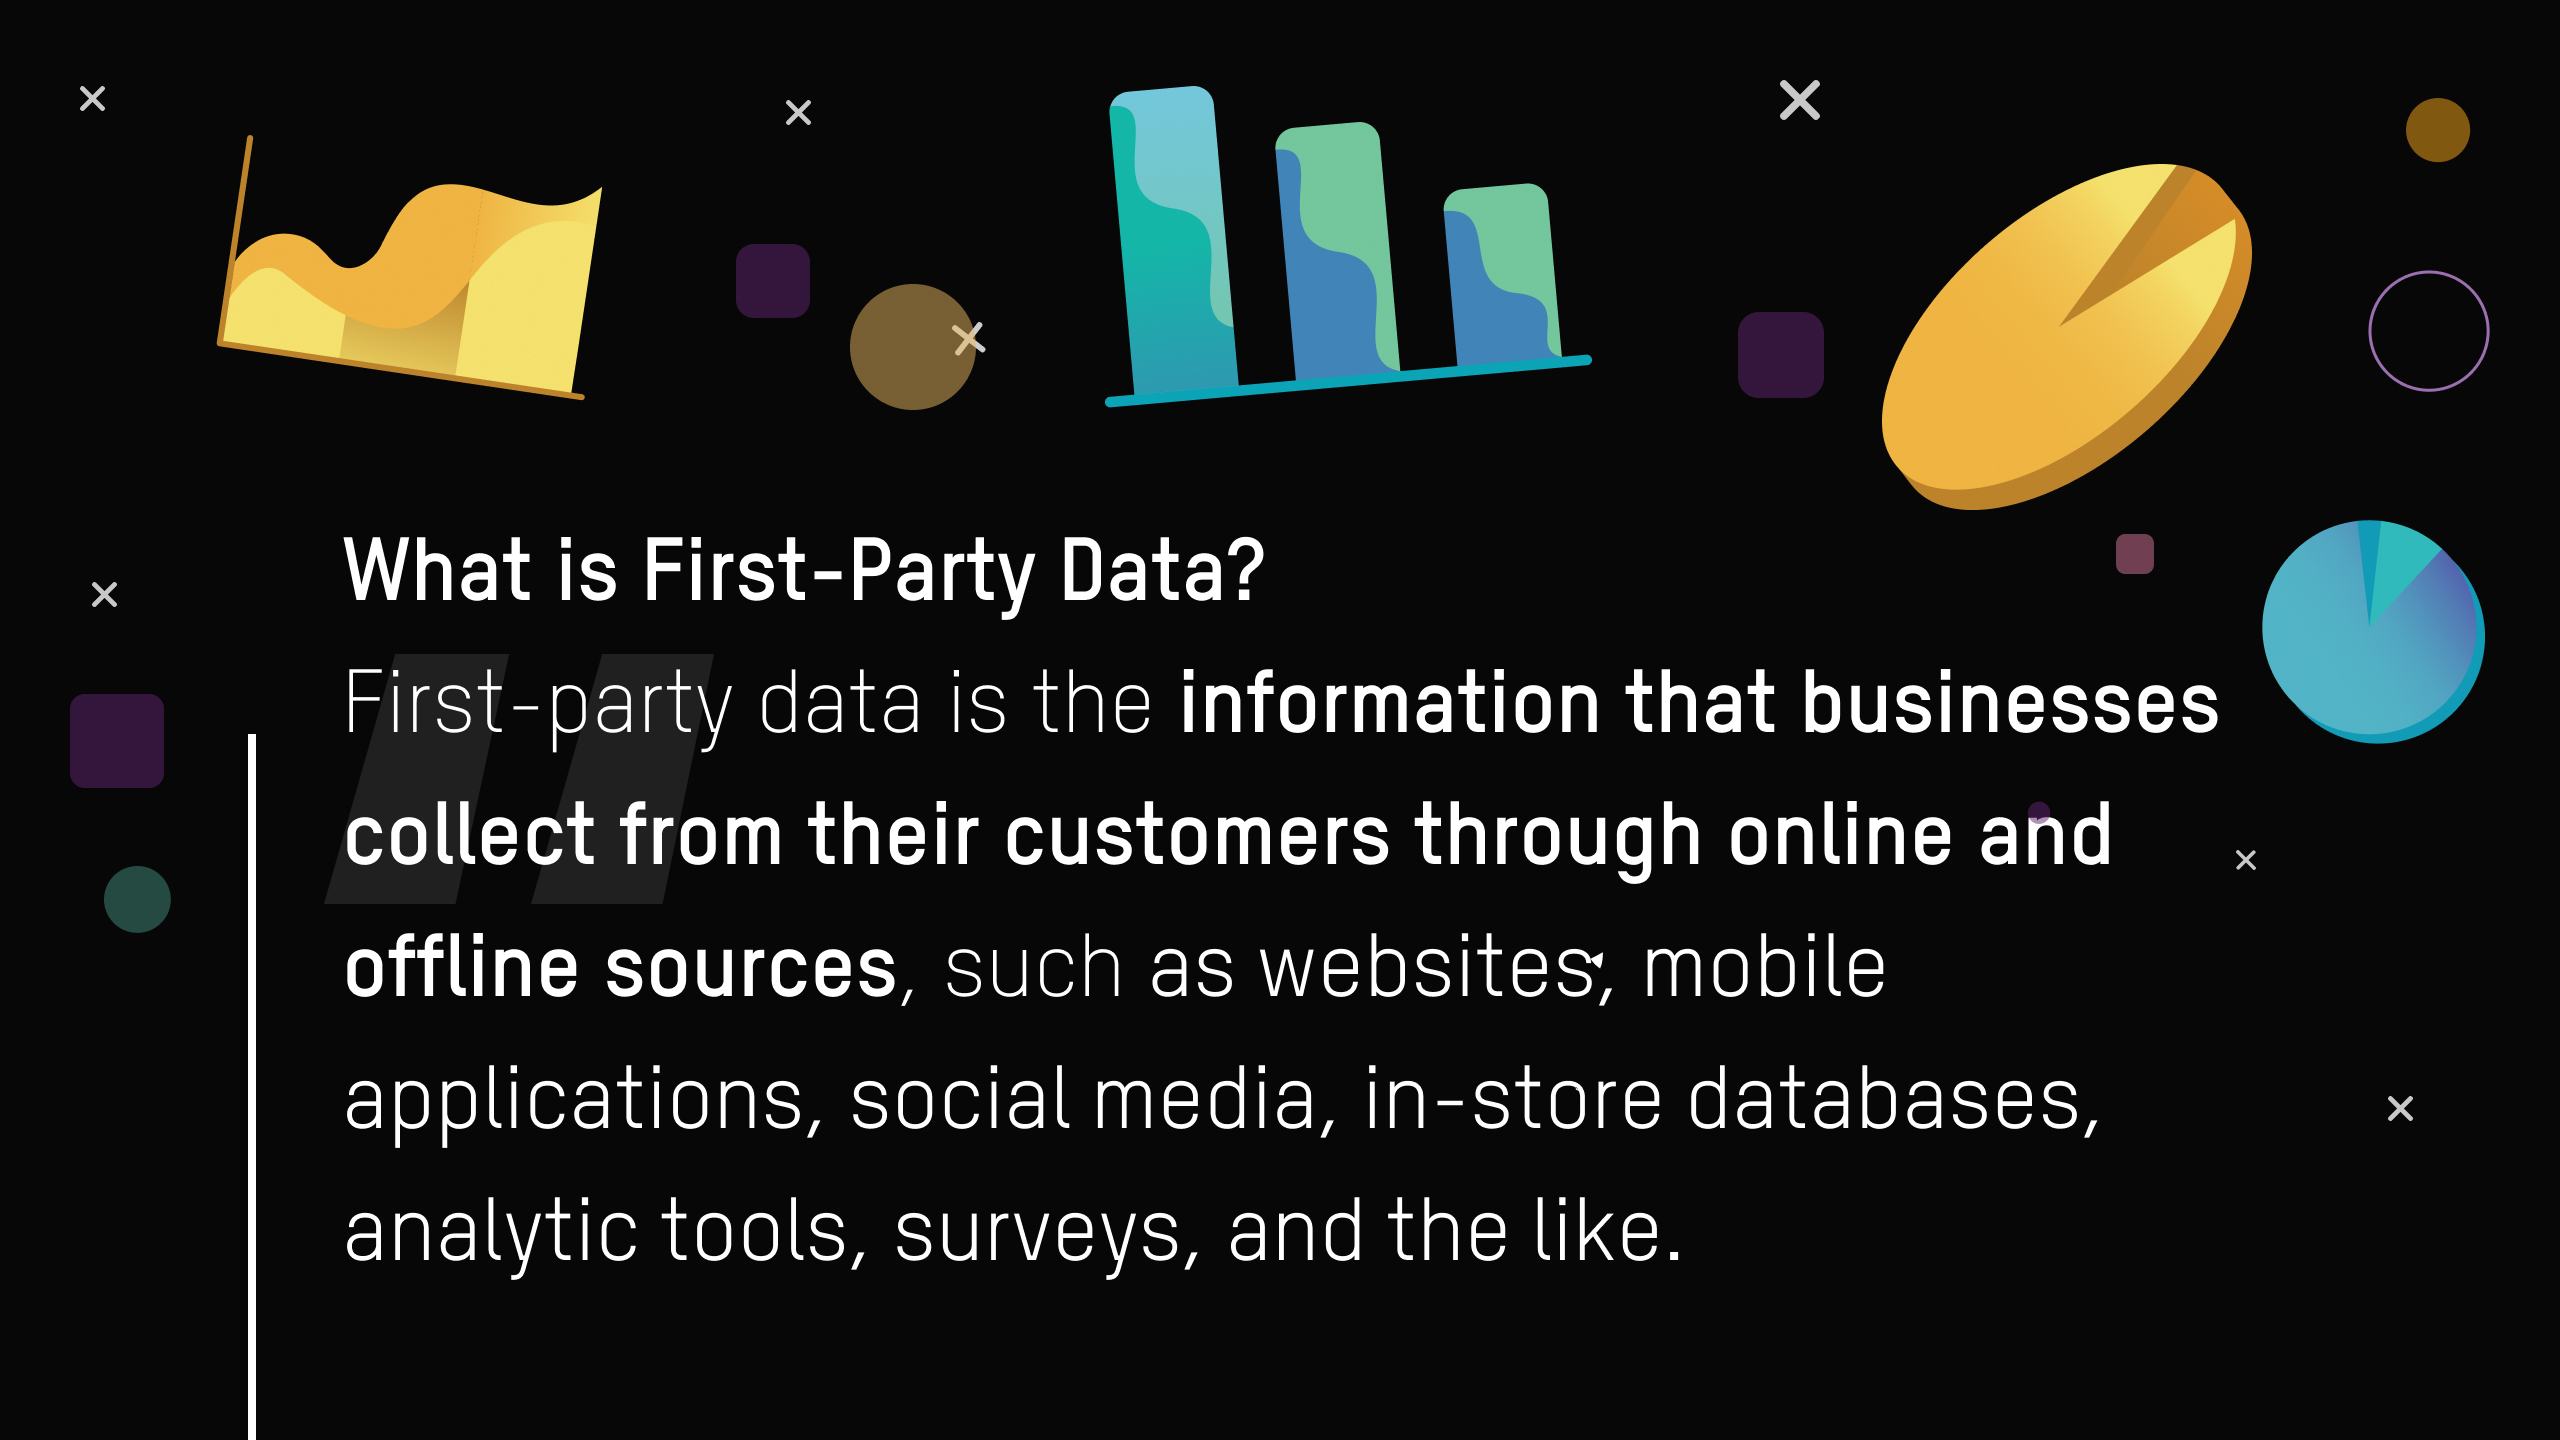 What is First-Party Data?